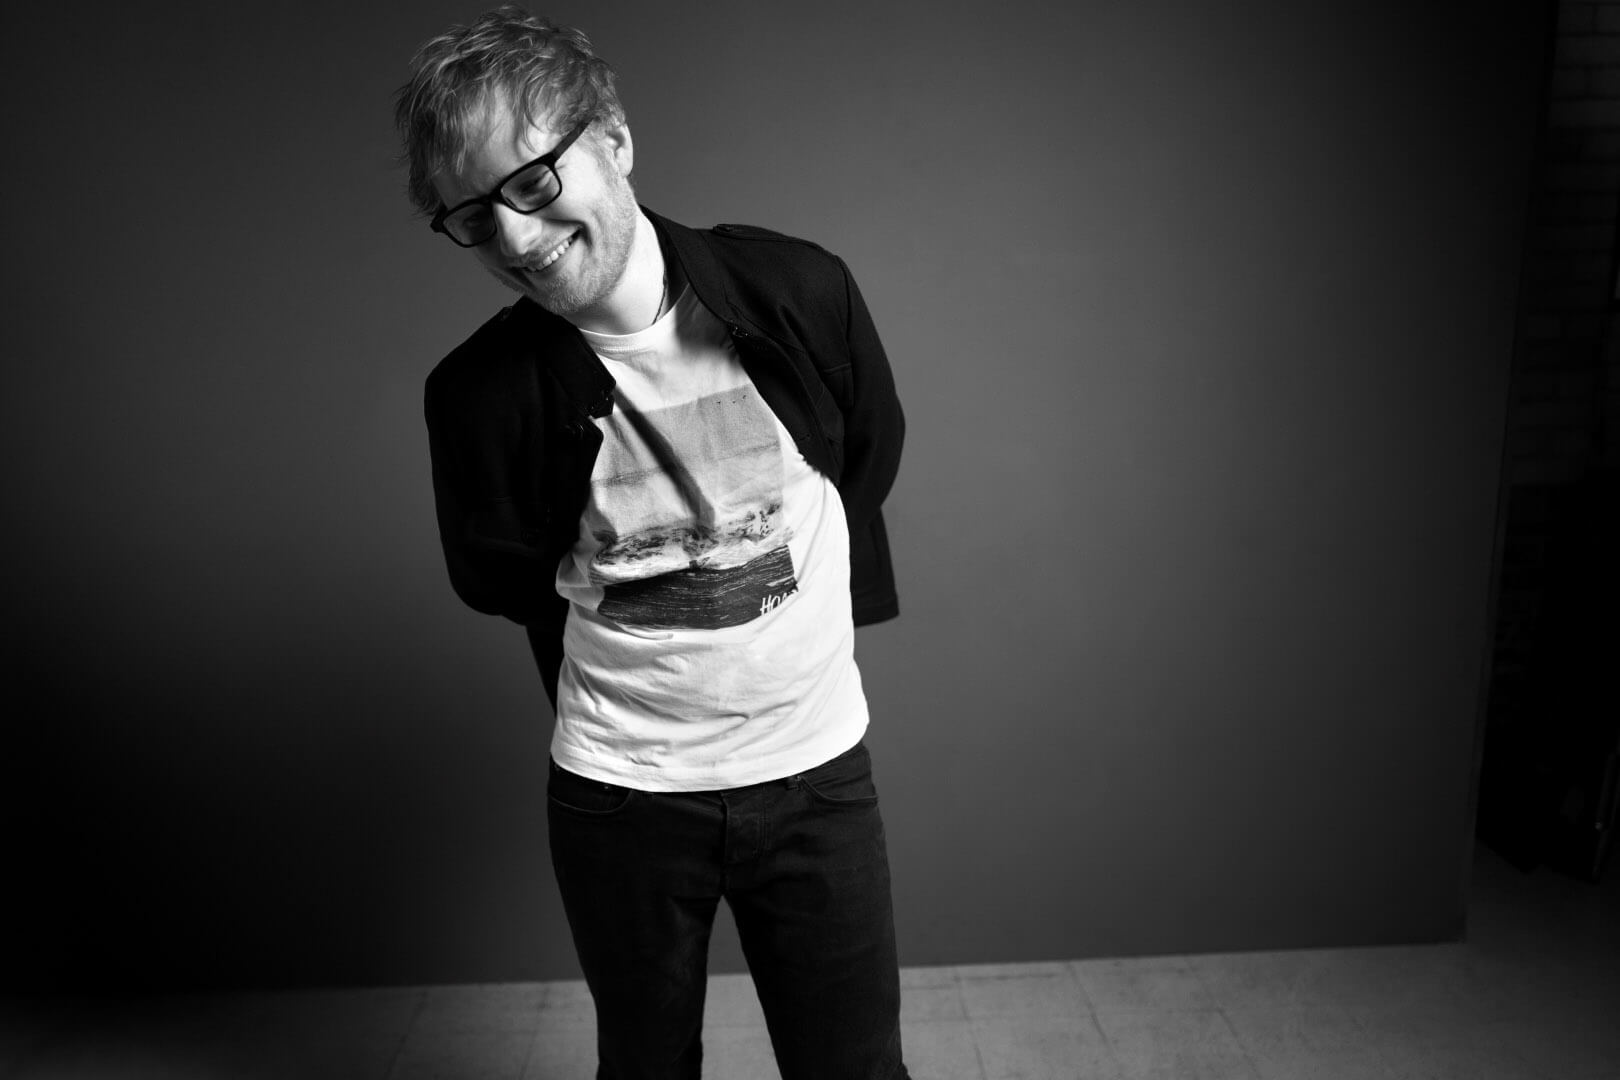 Ed Sheeran Makes a Triumphant Return with ‘Castle on the Hill’ and ‘Shape of You’: Listen